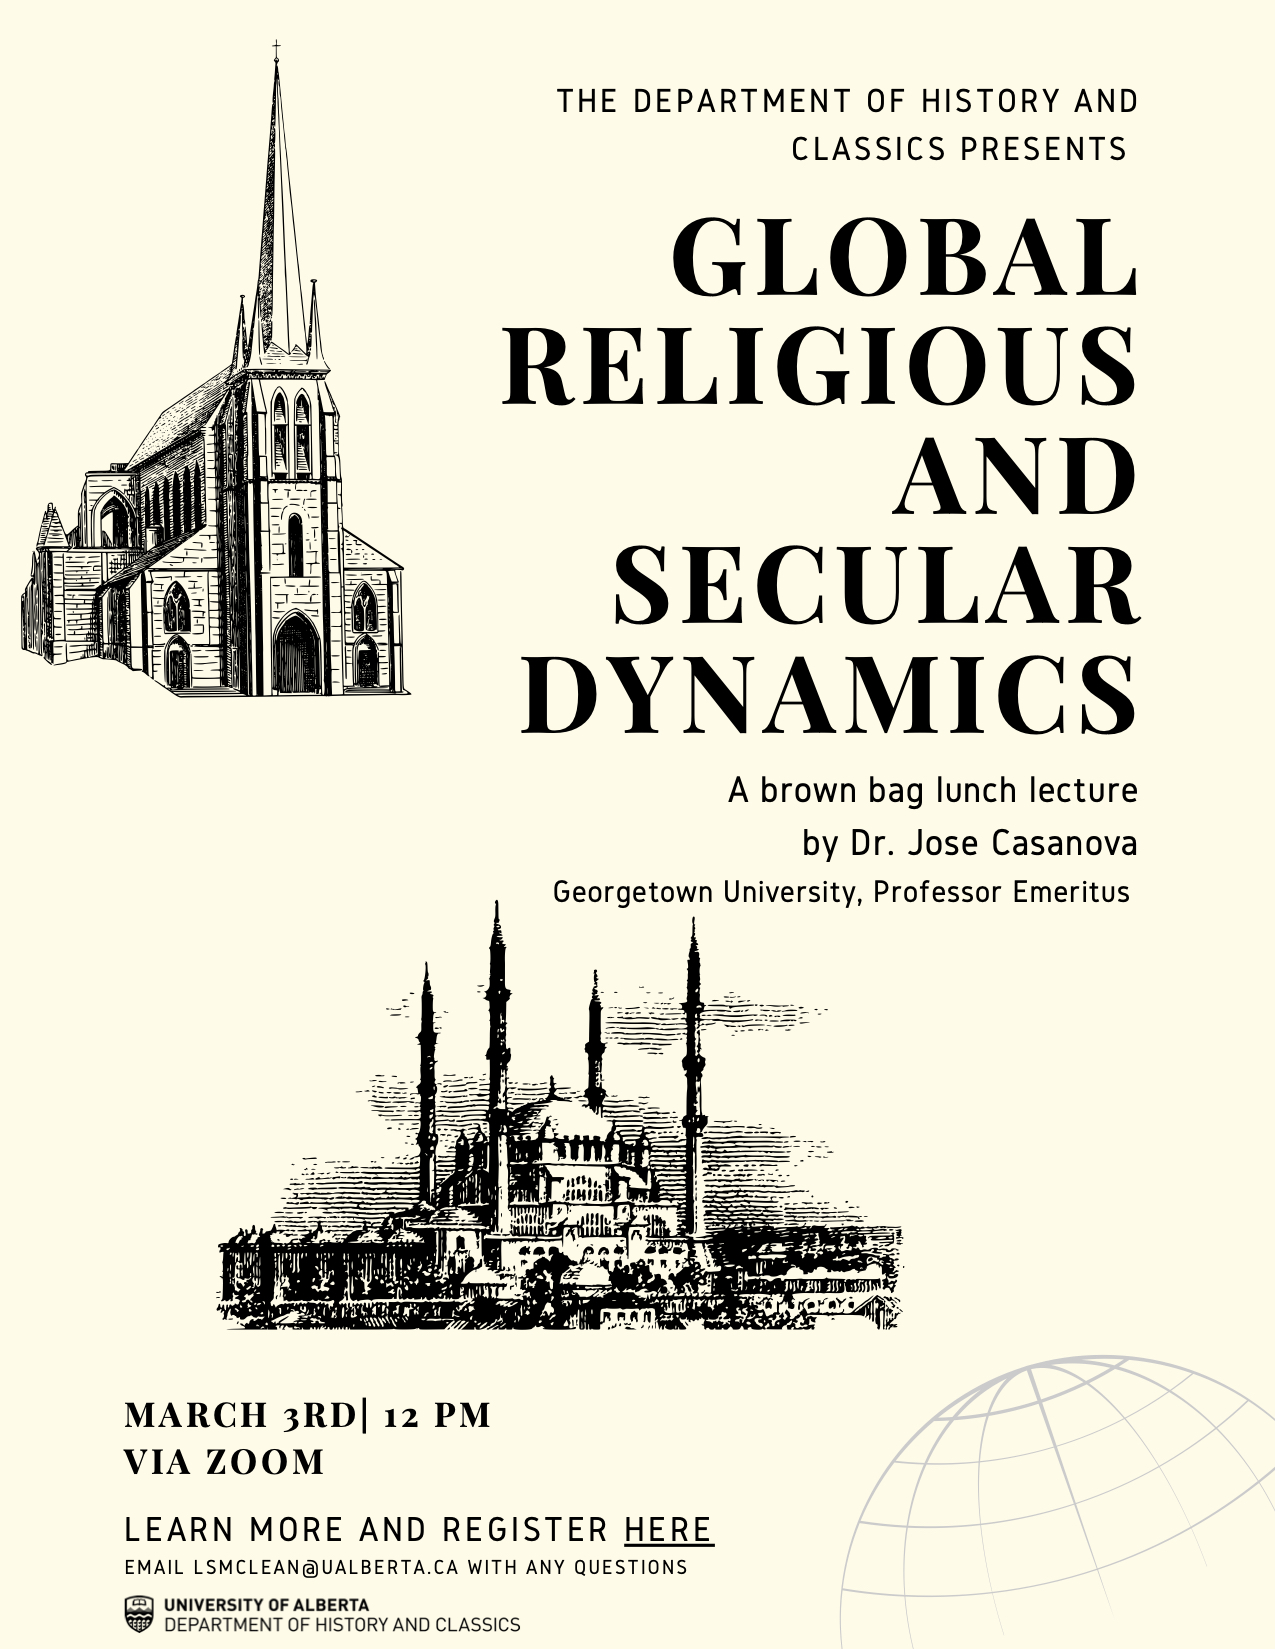 global-religious-and-secular-dynamics-poster-1.jpg